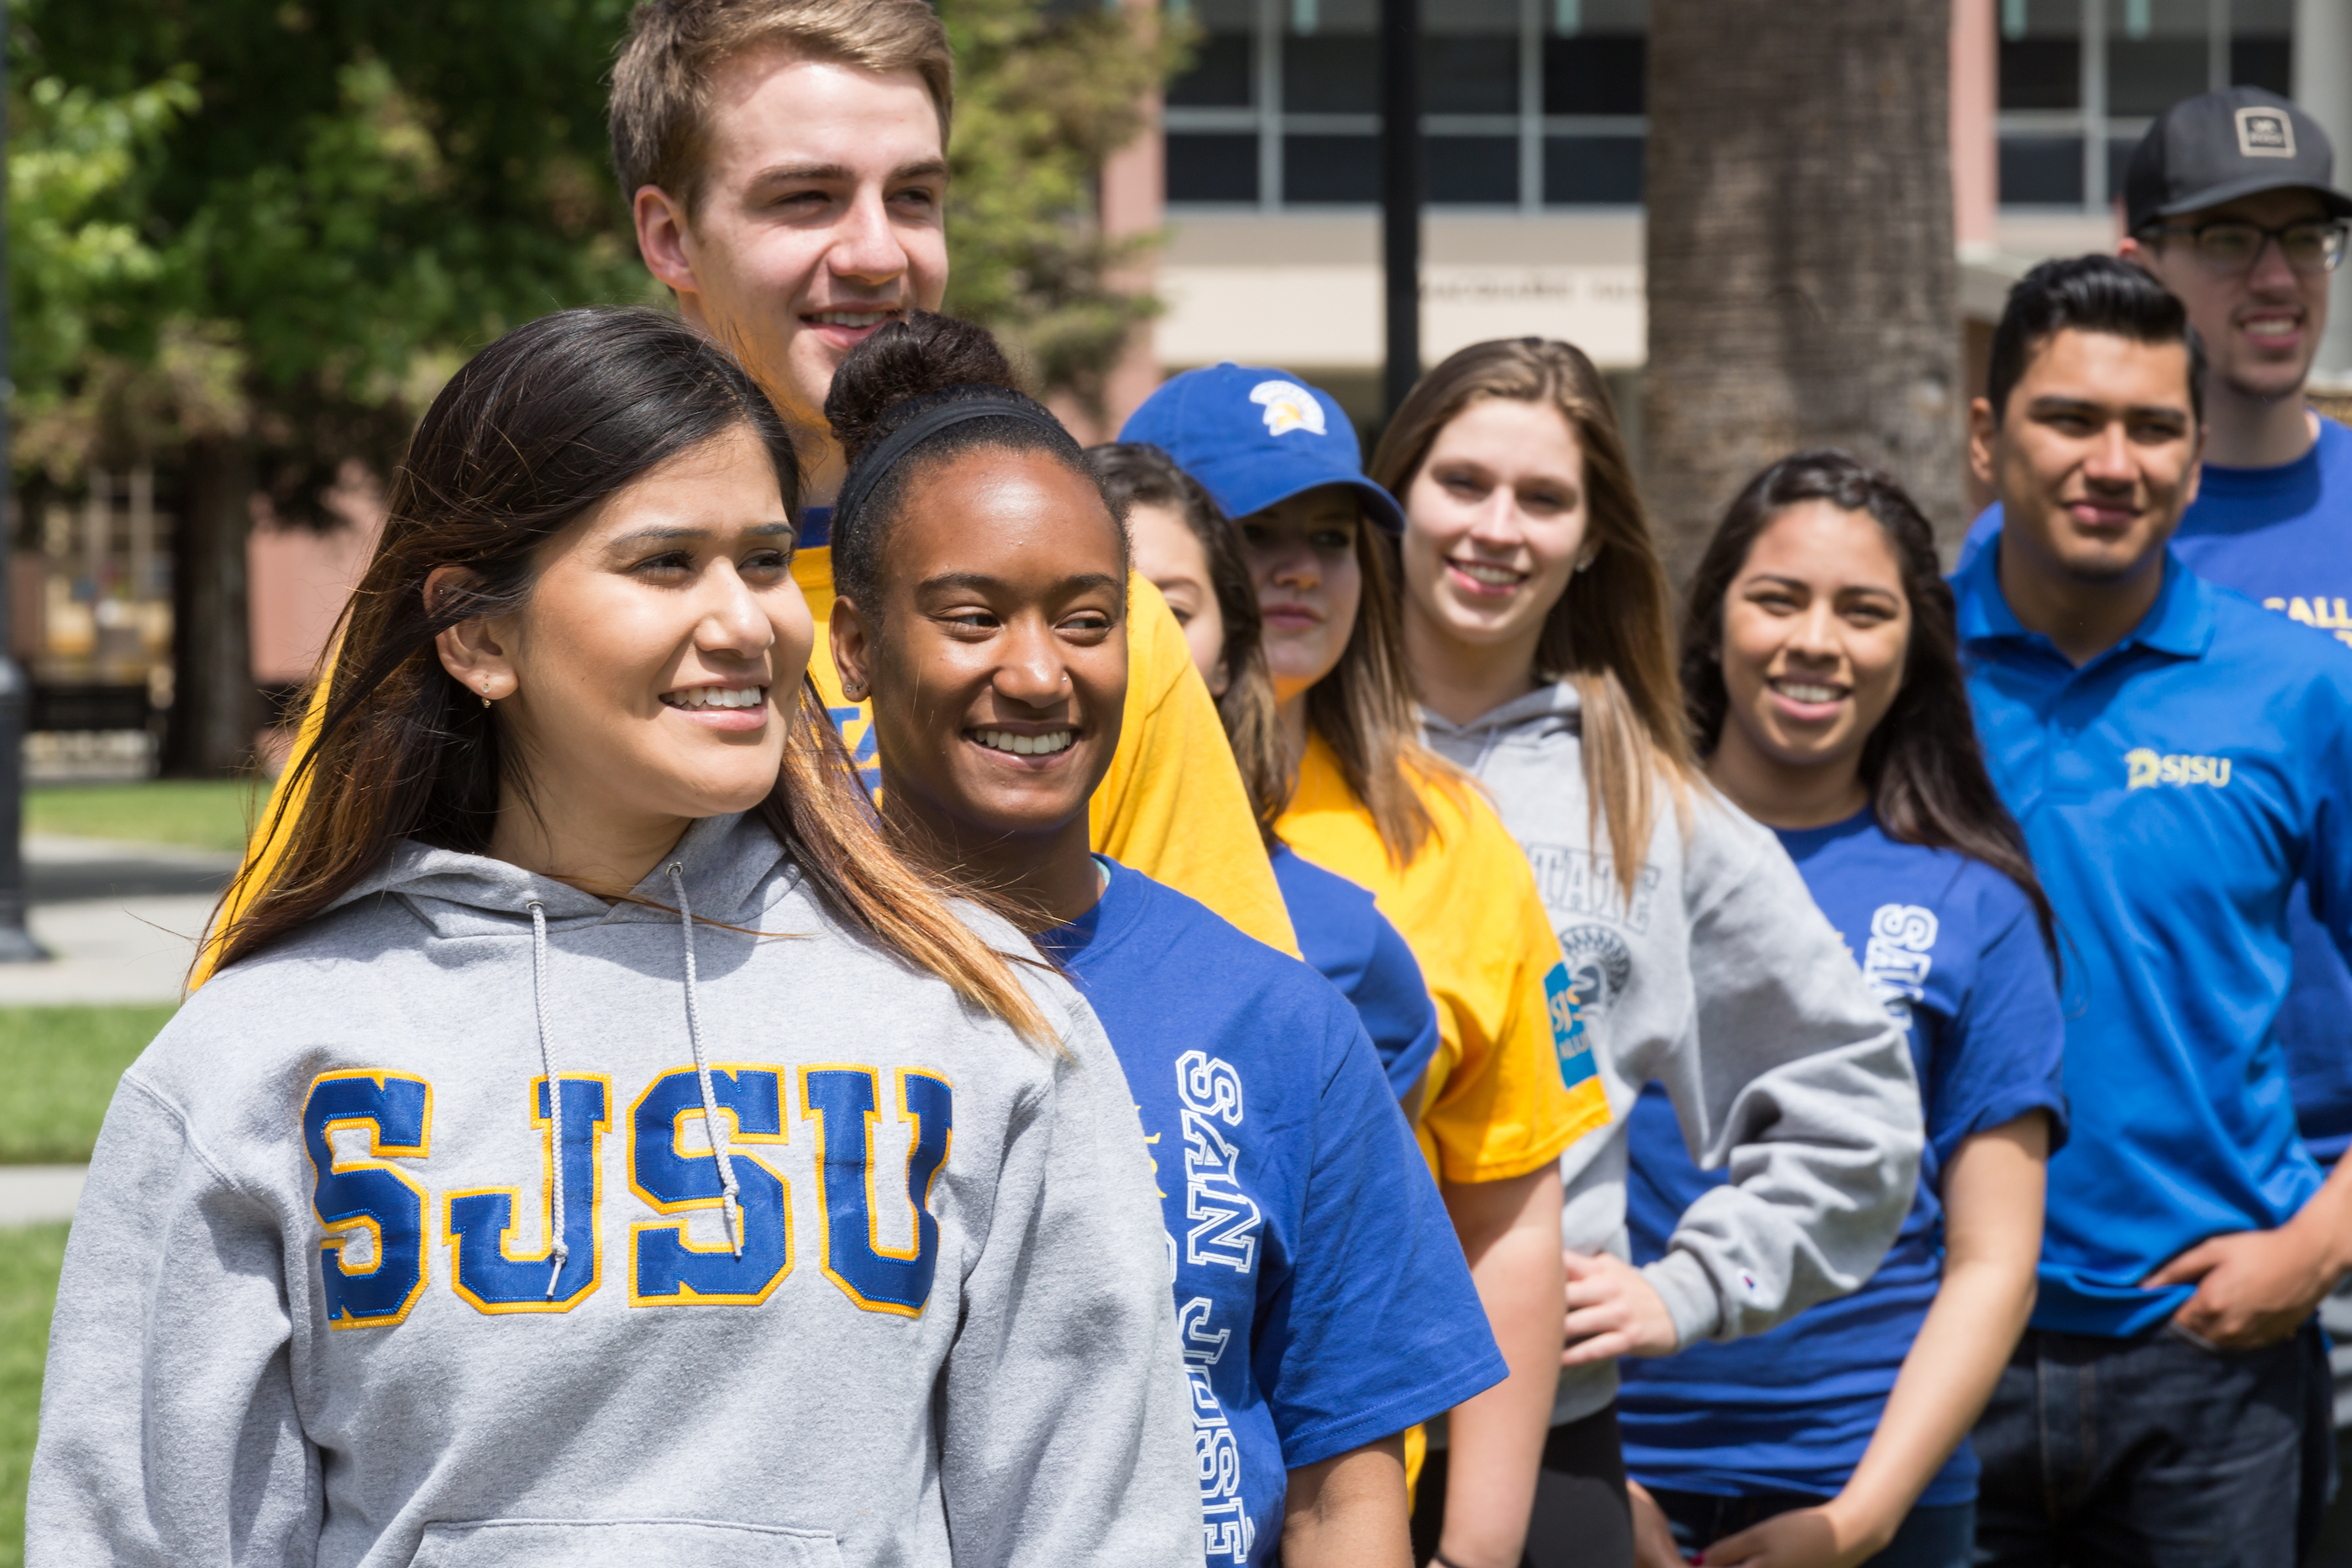 The Division of Student Affairs enhances the student experience and contributes to student success at SJSU.